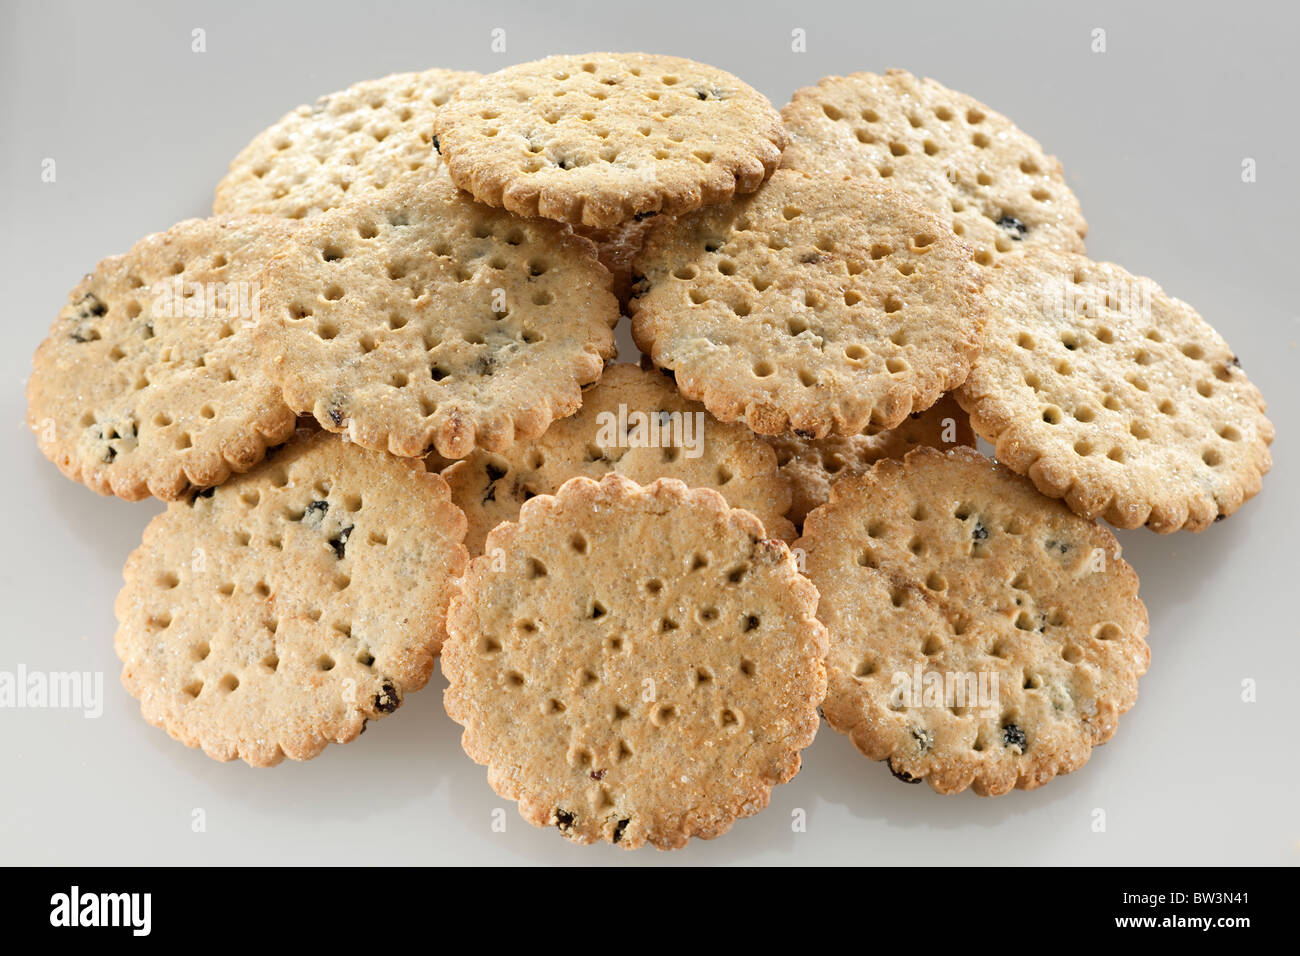 Pile of fruit shortcake biscuits Stock Photo